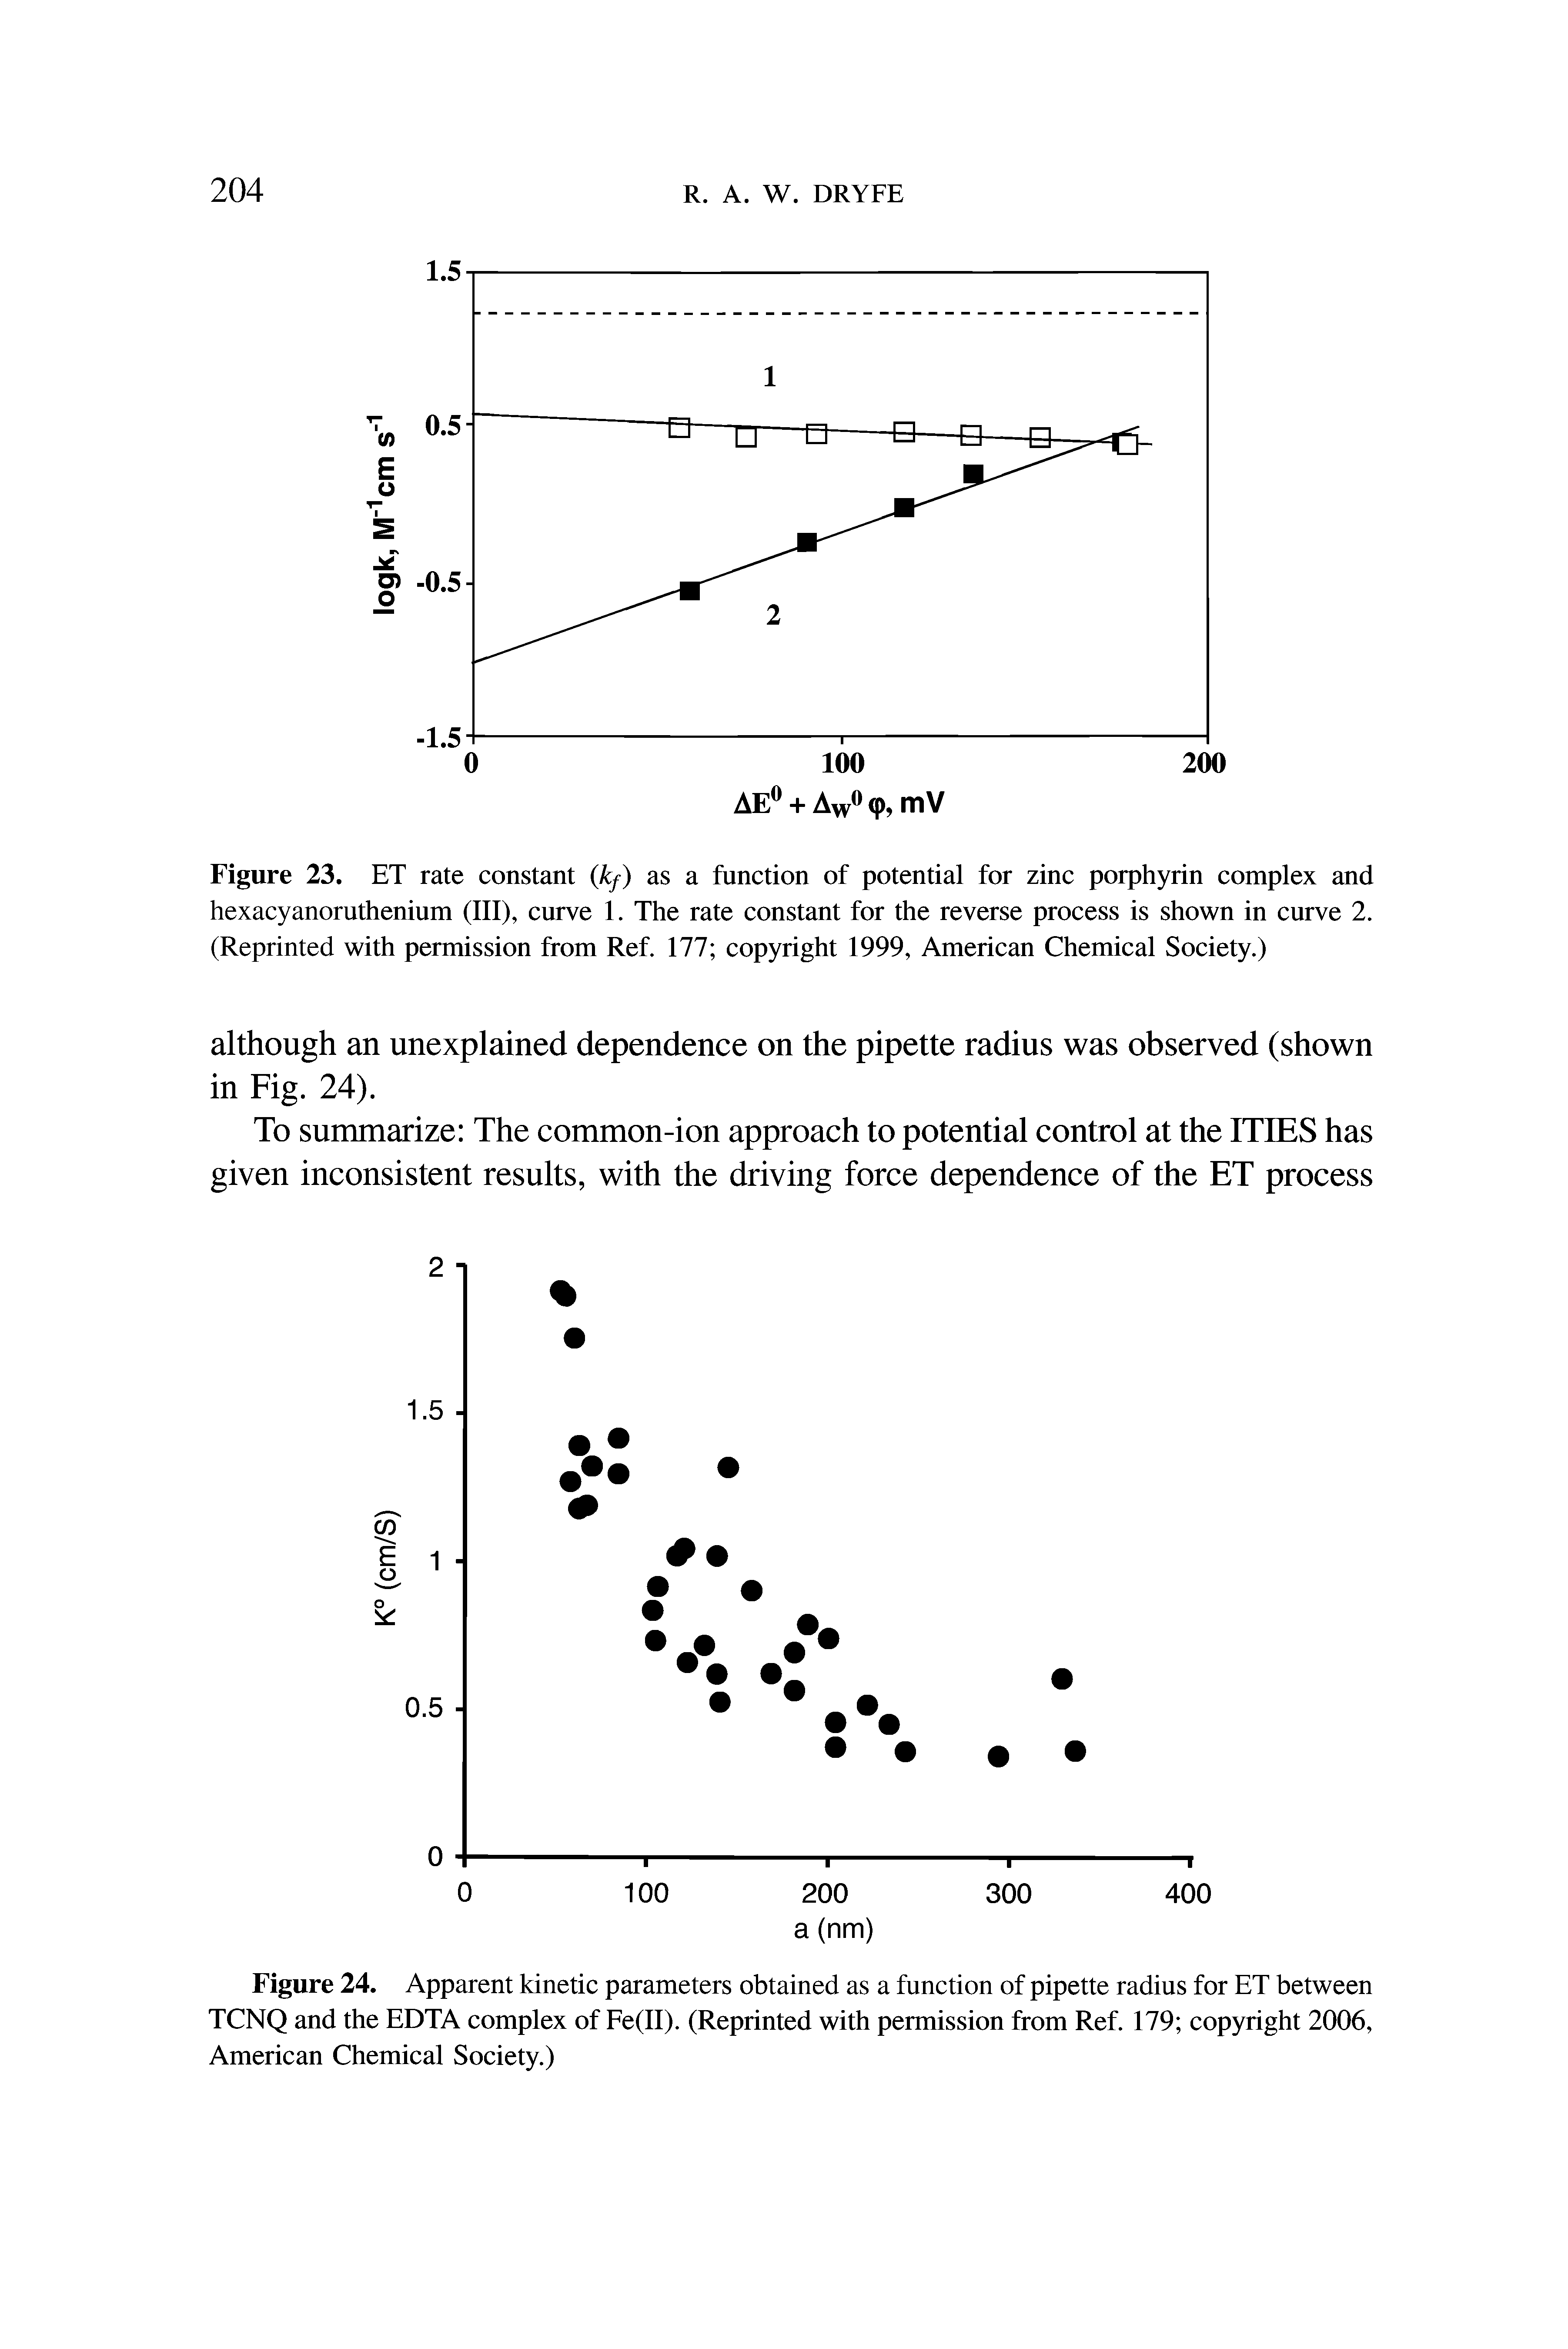 Figure 24. Apparent kinetic parameters obtained as a function of pipette radius for ET between TCNQ and the EDTA complex of Fe(II). (Reprinted with permission from Ref. 179 copyright 2006, American Chemical Society.)...